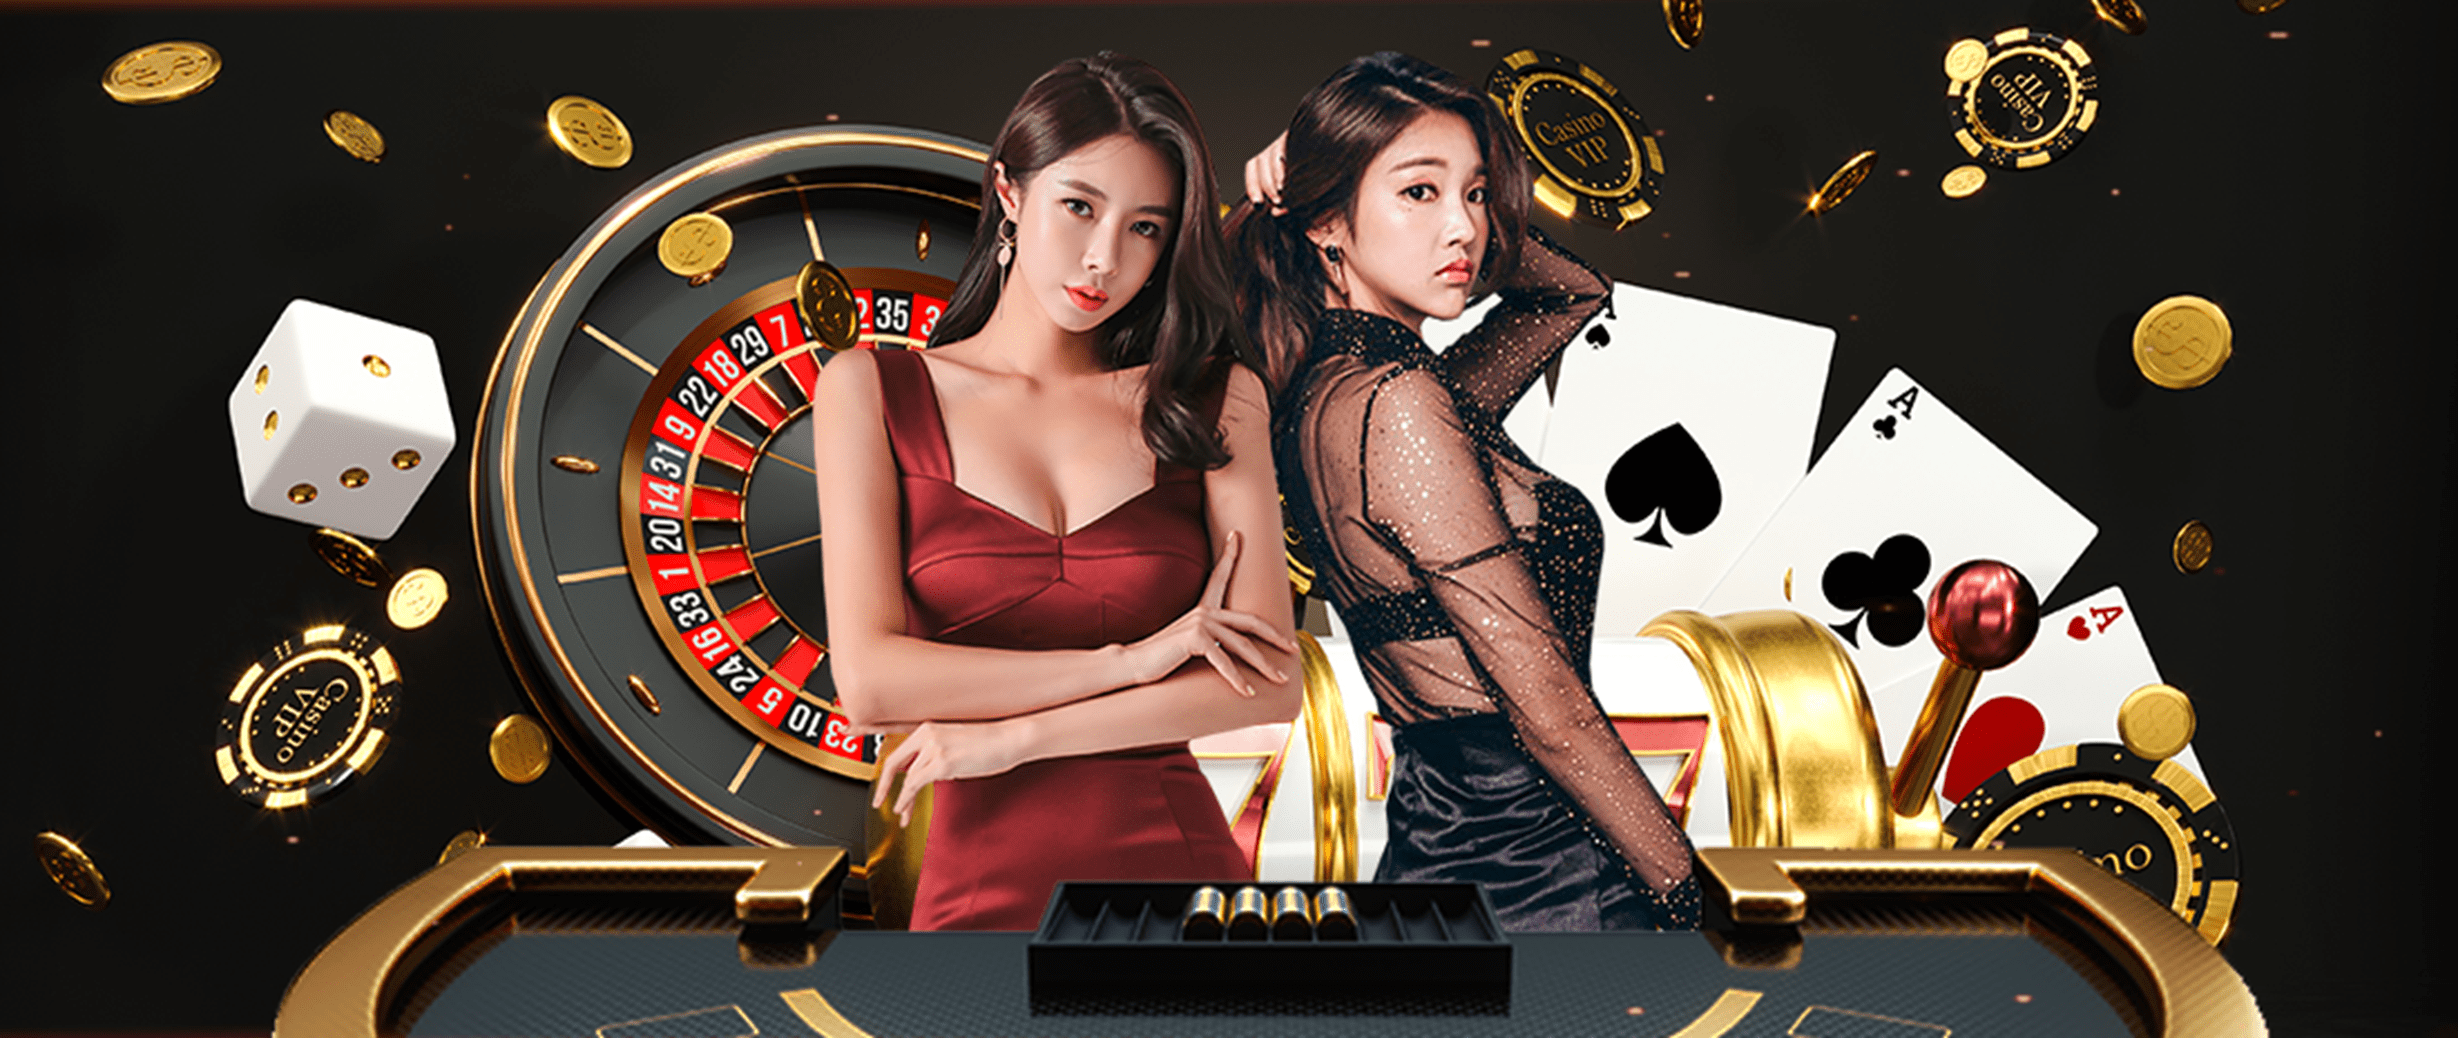 The Advantages of Playing Casino Games on Mobile Devices